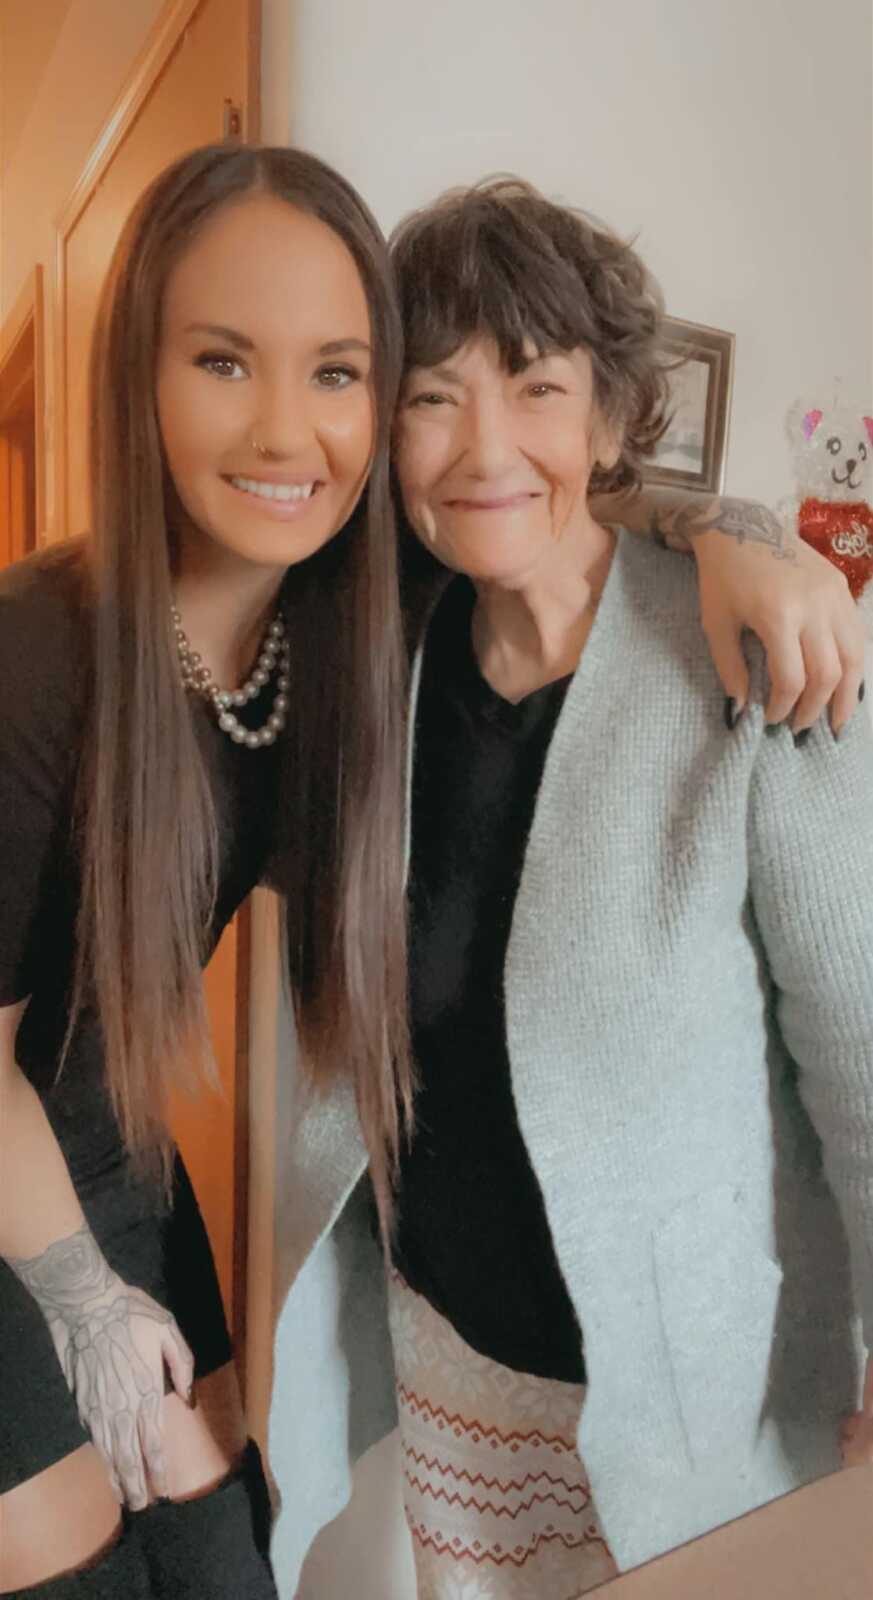 Daughter and mom with schizophrenia smile together